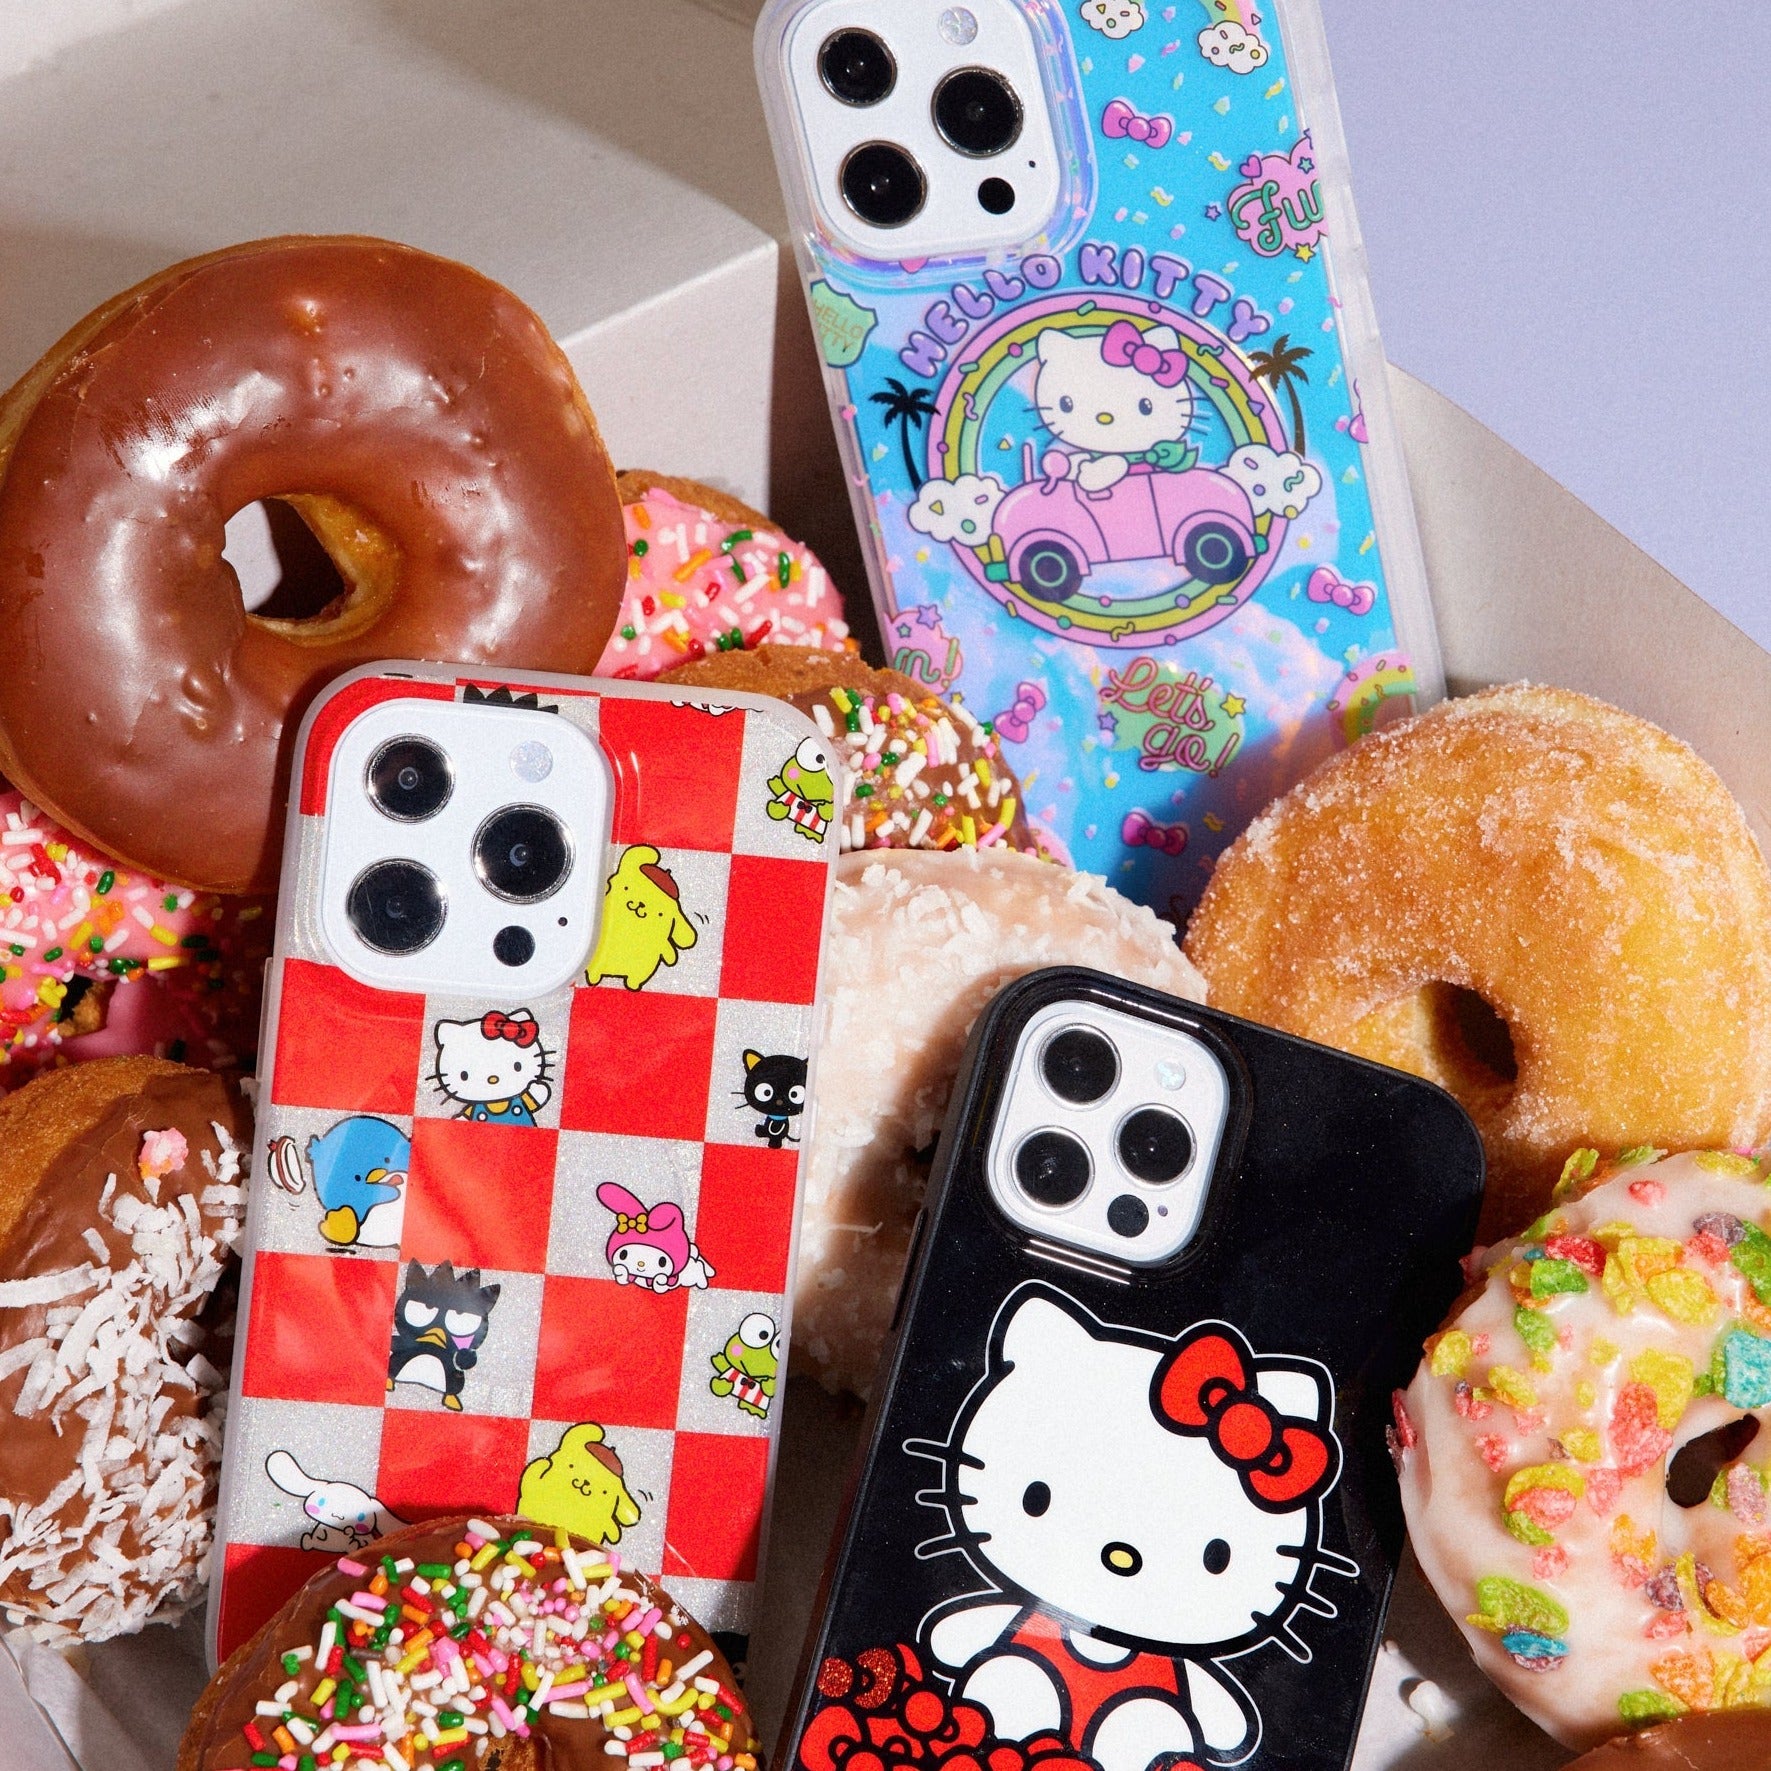 three hello kitty themed cases in a box of donuts